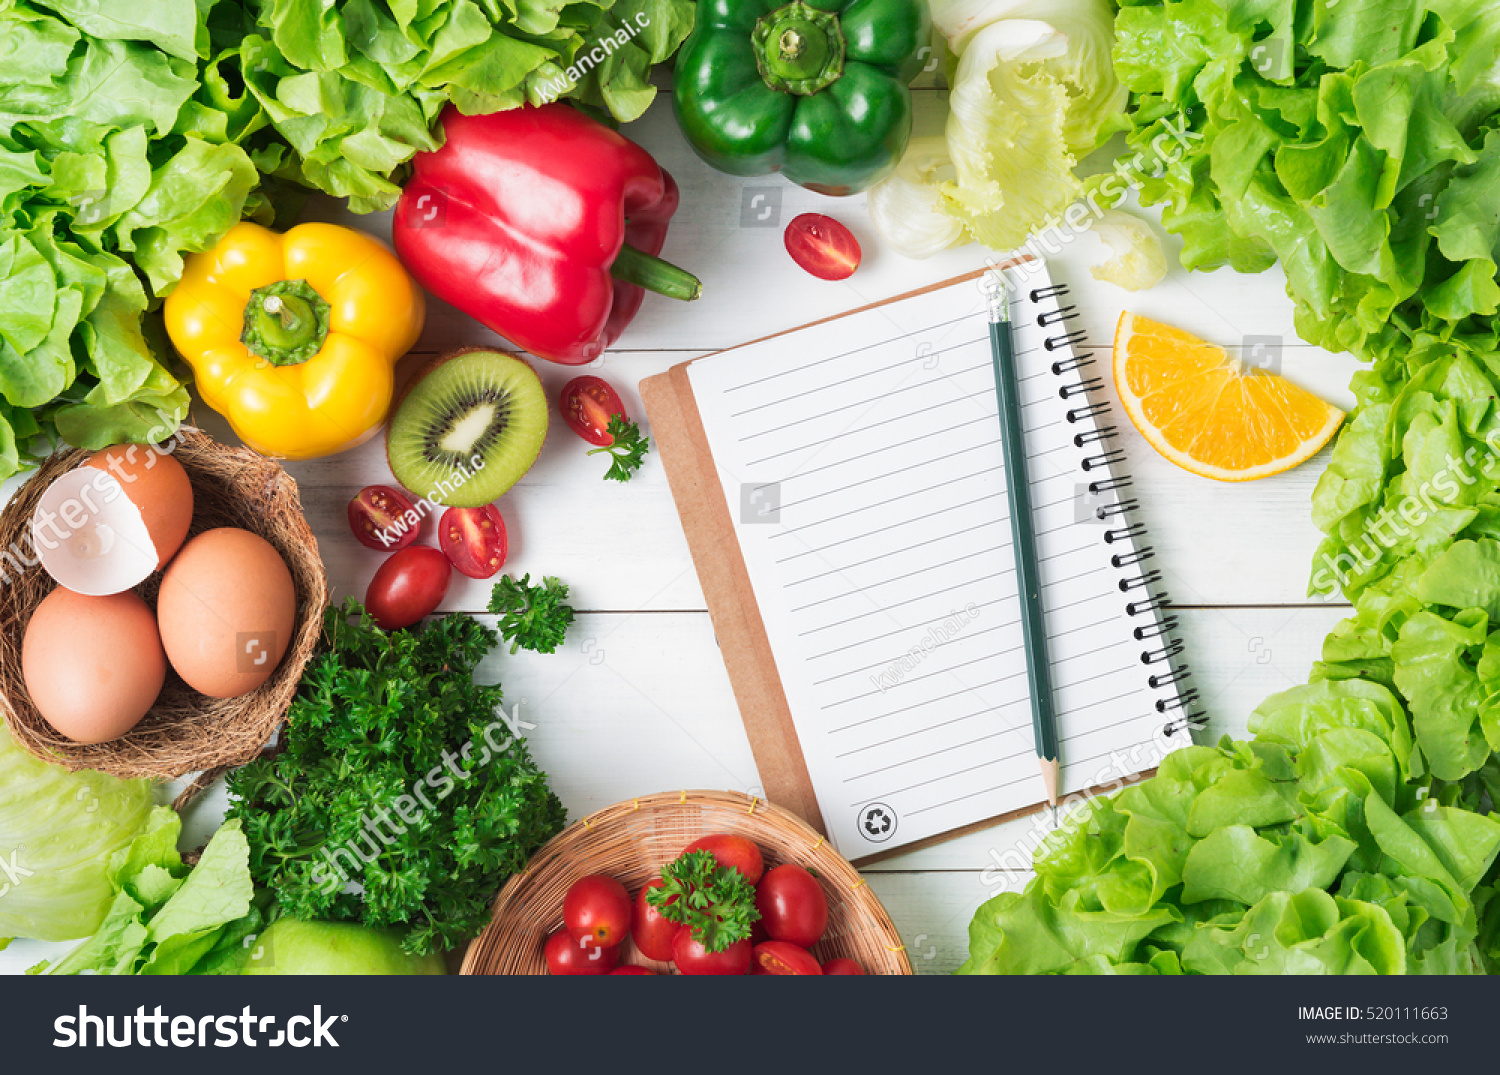 salad vegetables and fruit, tomato, bell pepper, parsley, orange, egg and kiwi fruit with notebook and pencil on wood background and copy space, concept diet and healthy food. #520111663